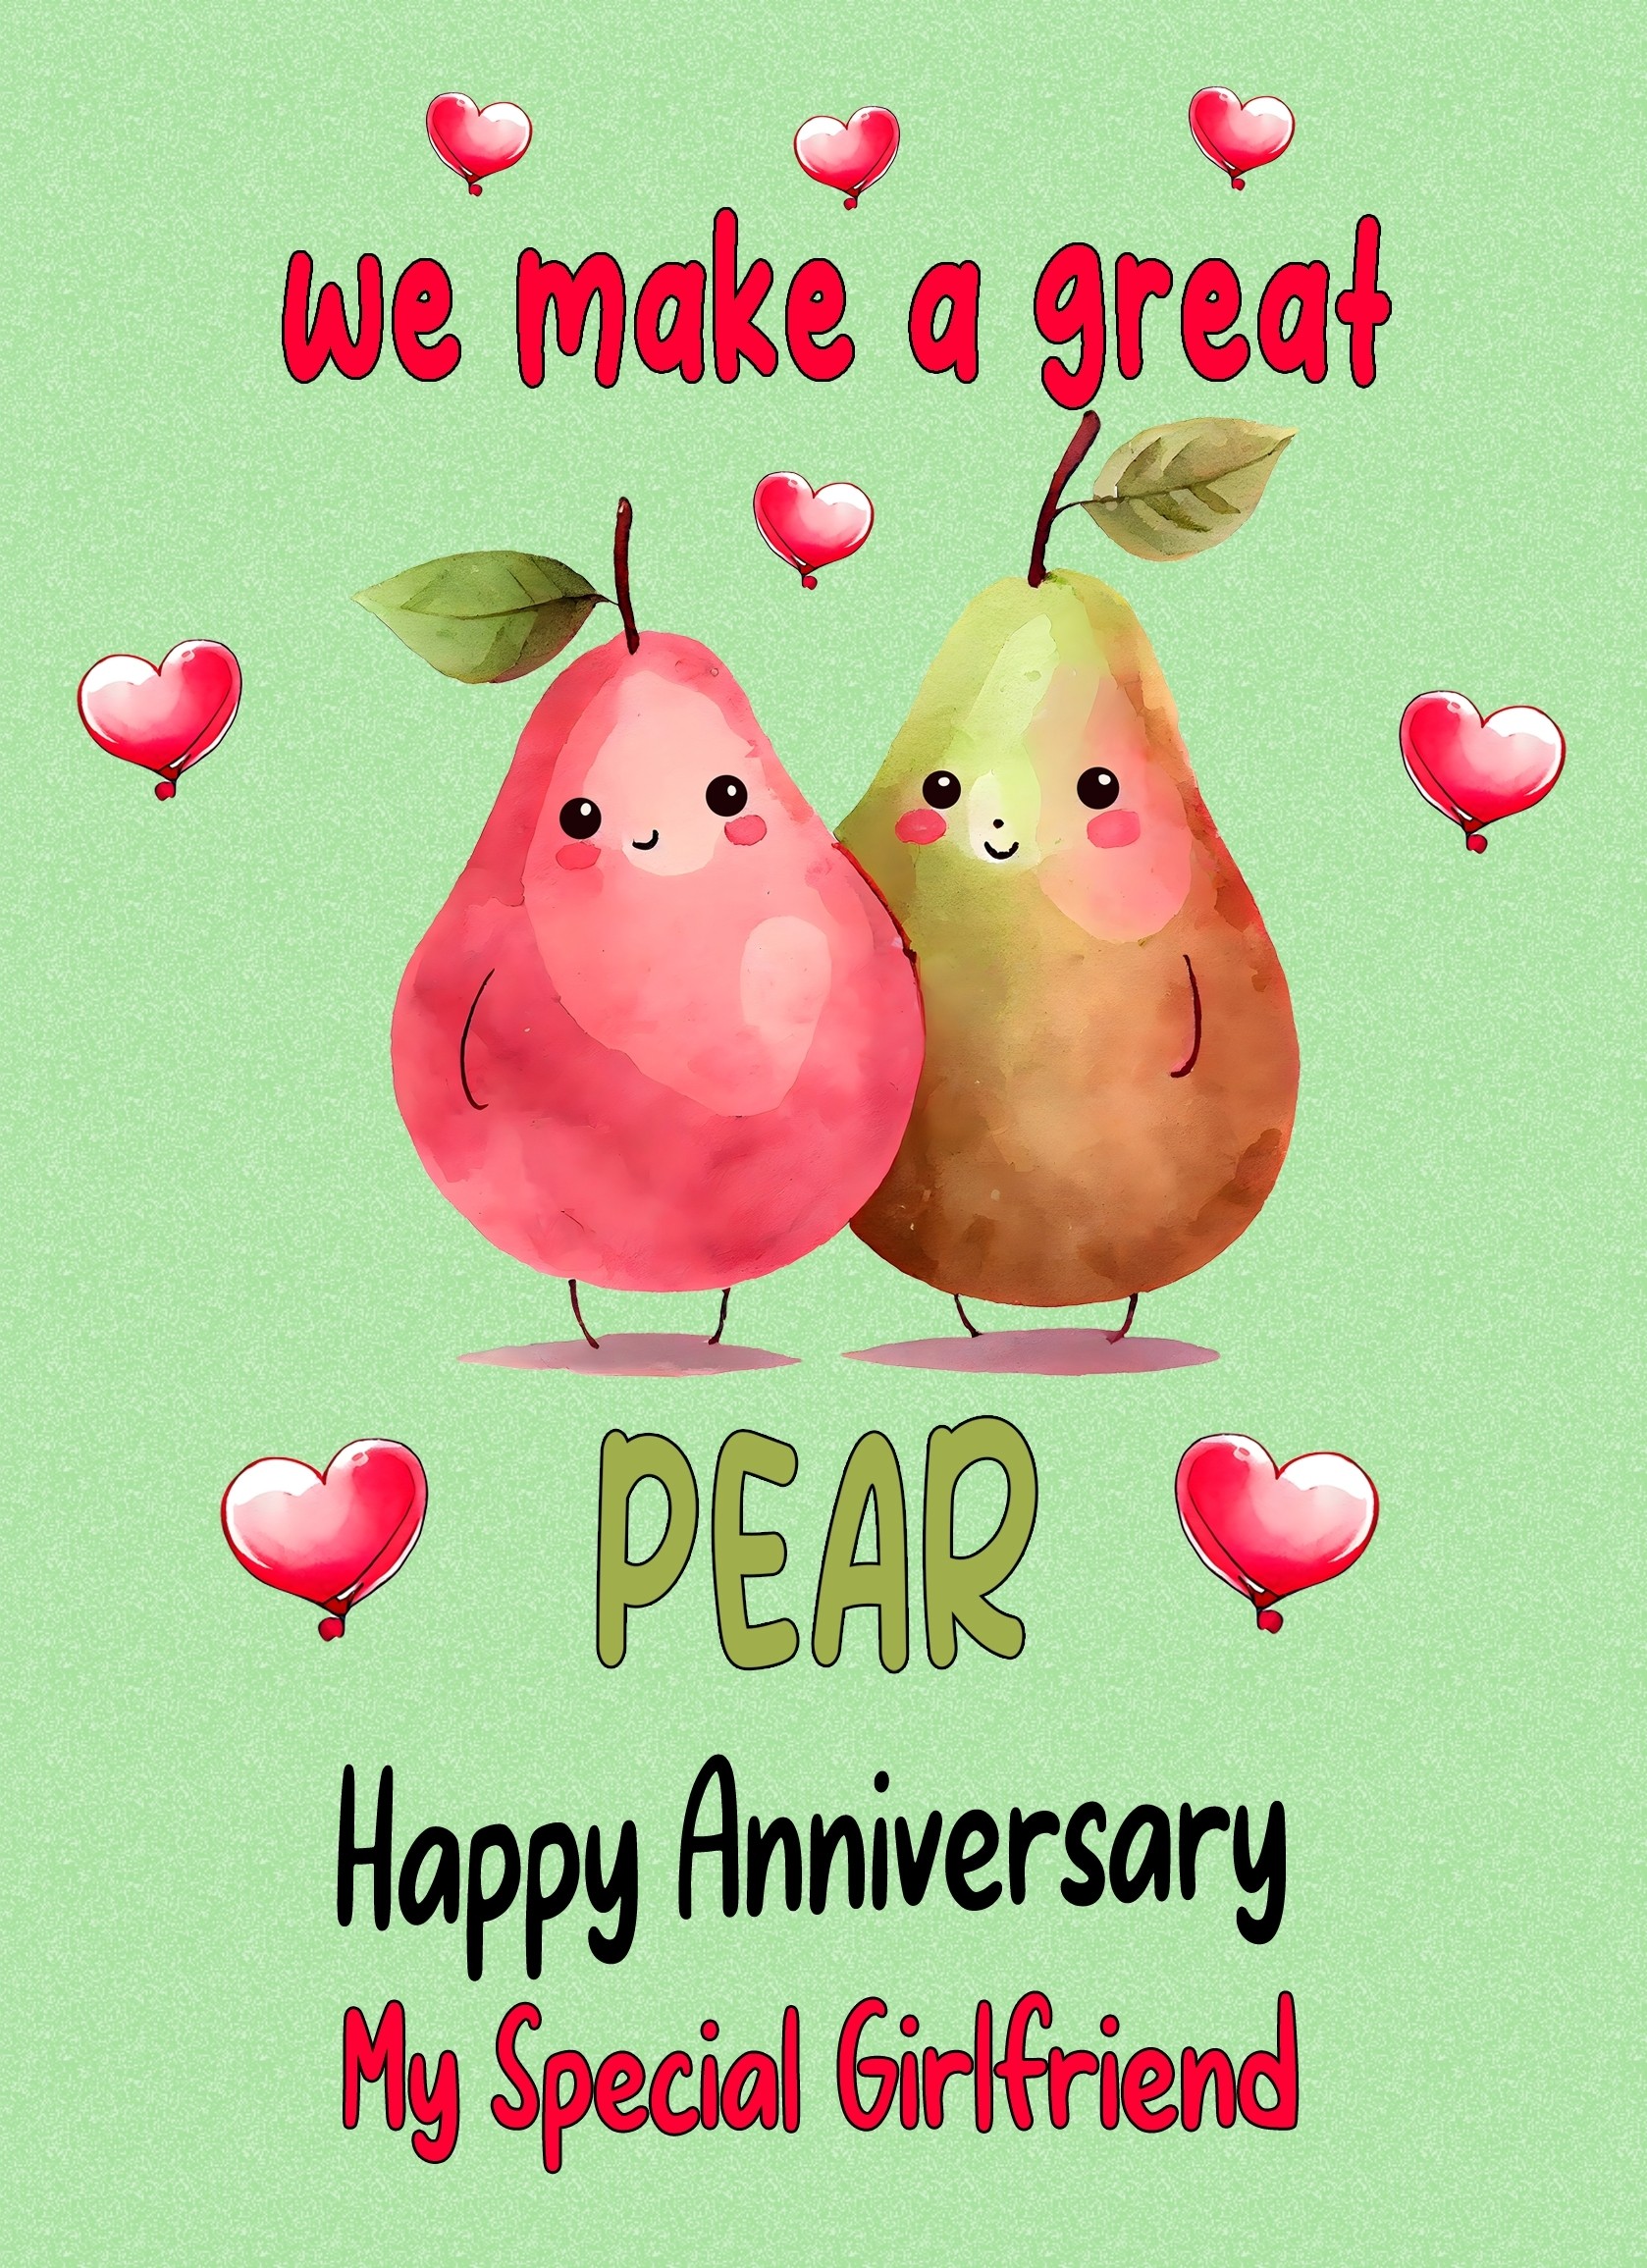 Funny Pun Romantic Anniversary Card for Girlfriend (Great Pear)